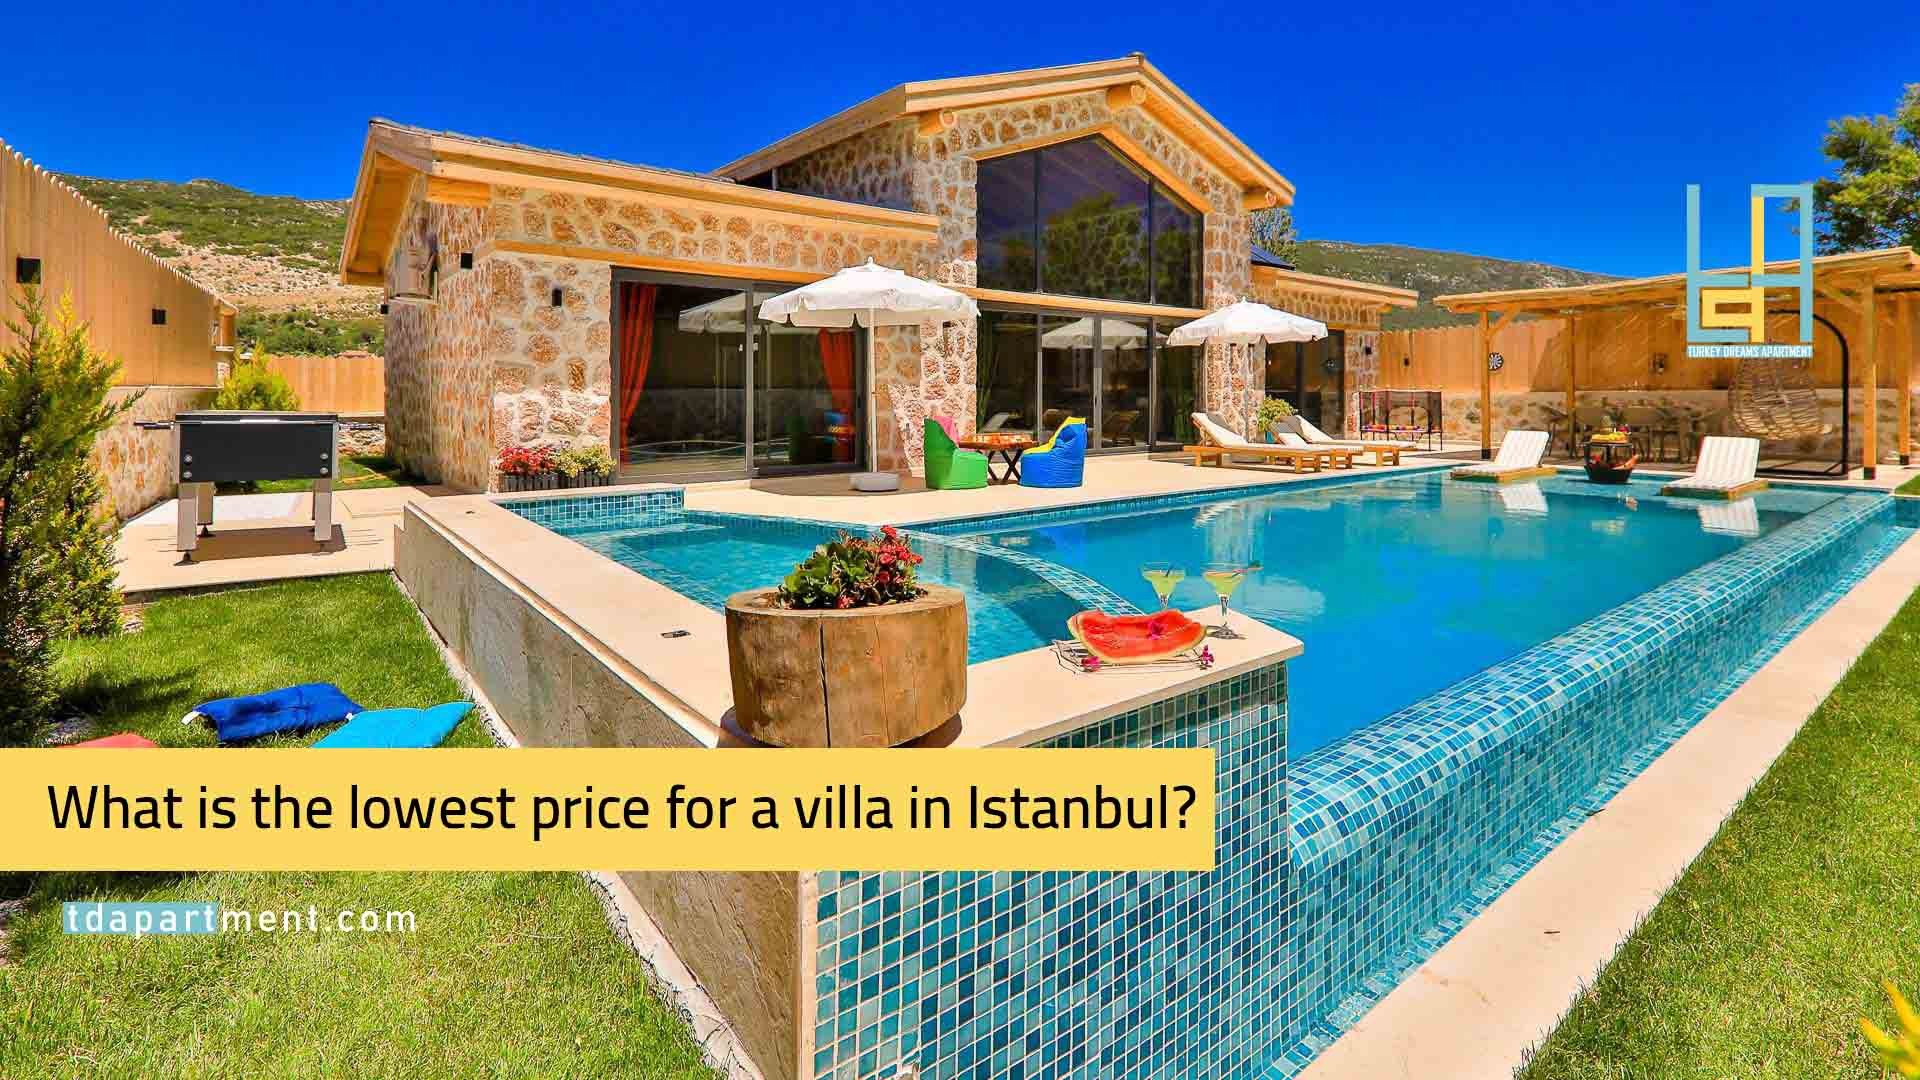 What is the lowest price for a villa in Istanbul?'